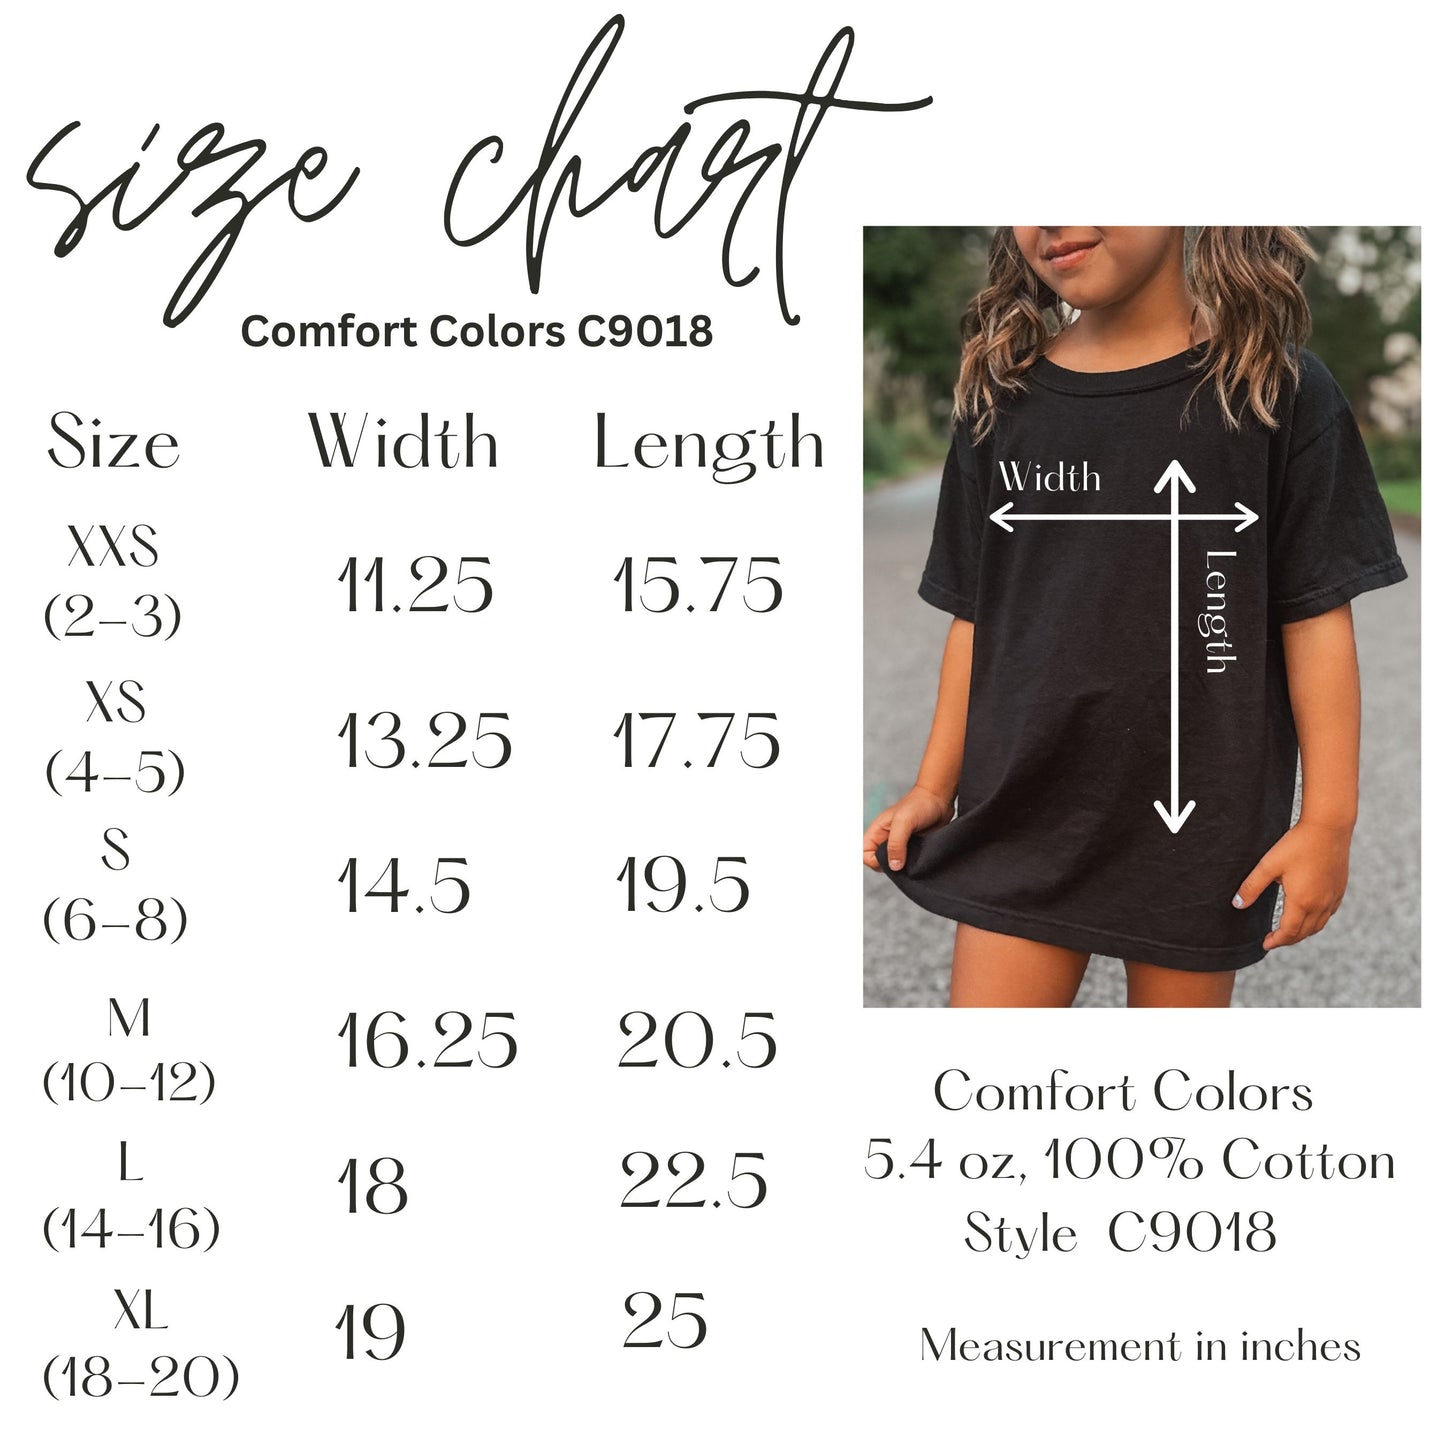 Youth Collection Child Of God Tee